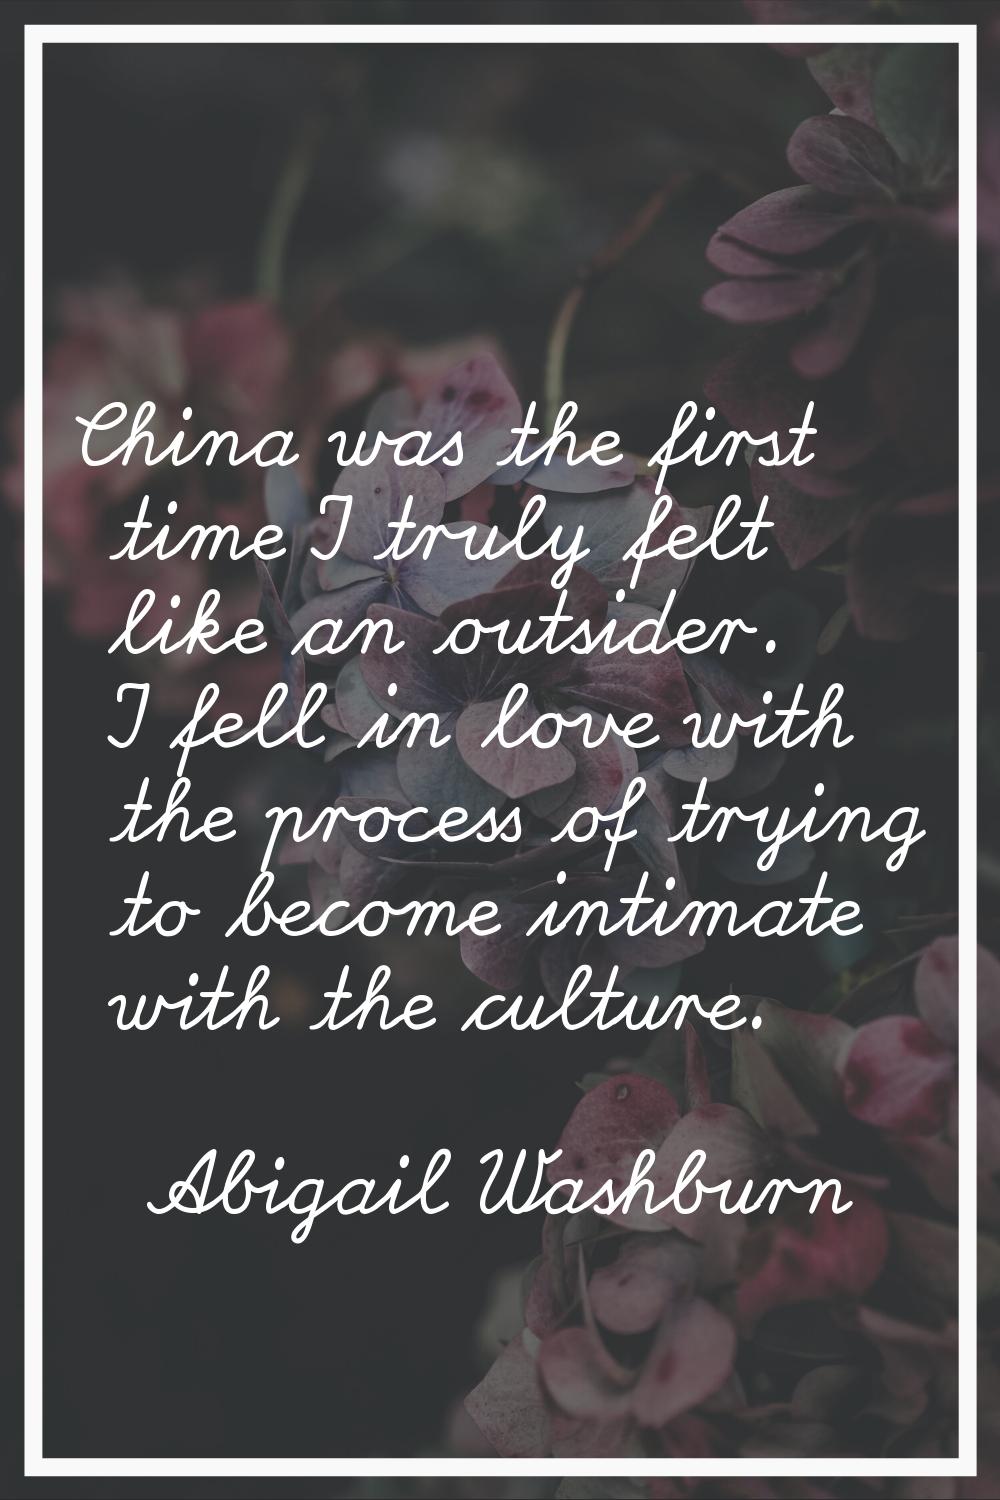 China was the first time I truly felt like an outsider. I fell in love with the process of trying t